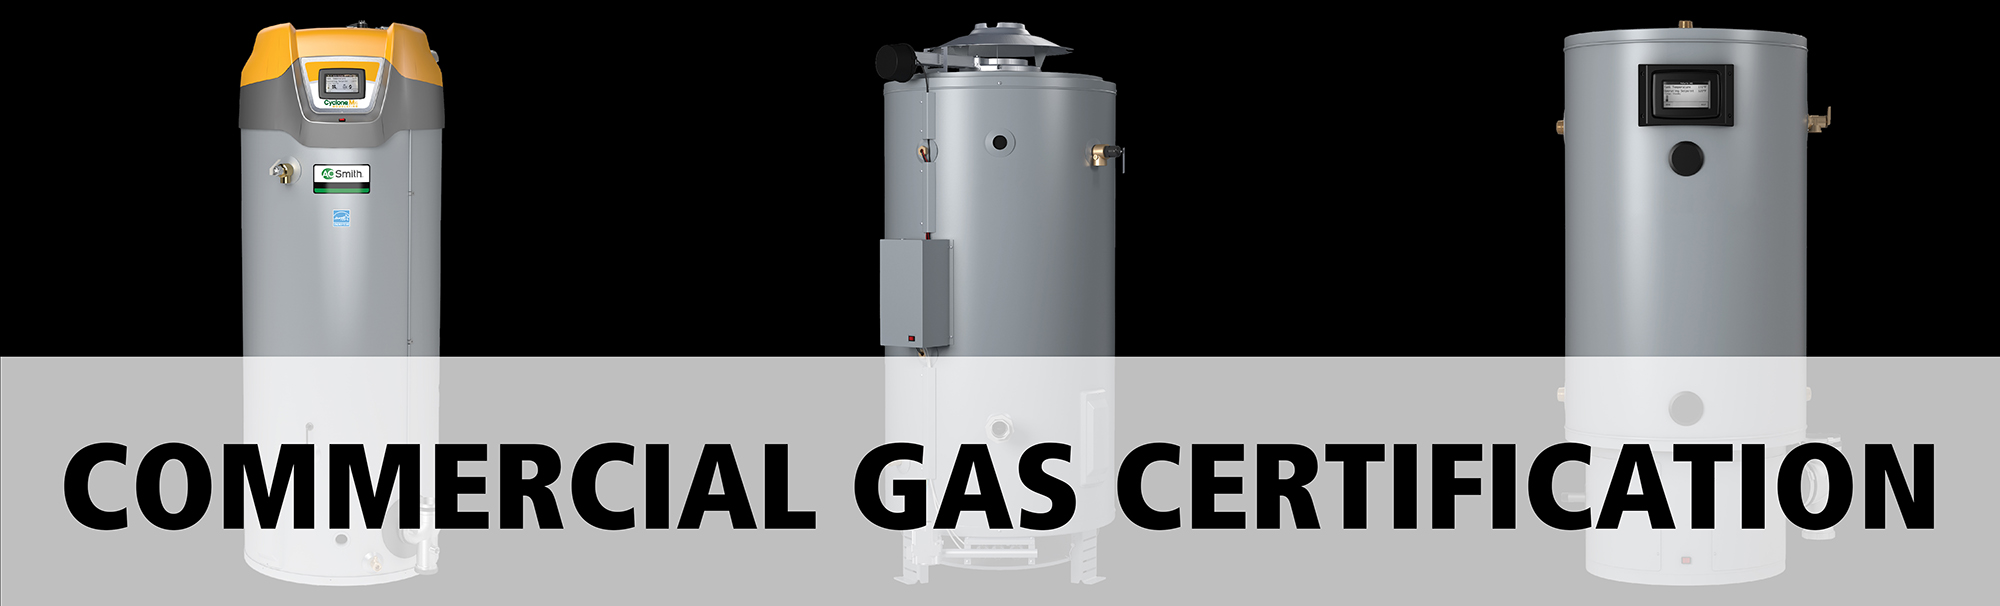 Commercial Gas Certification